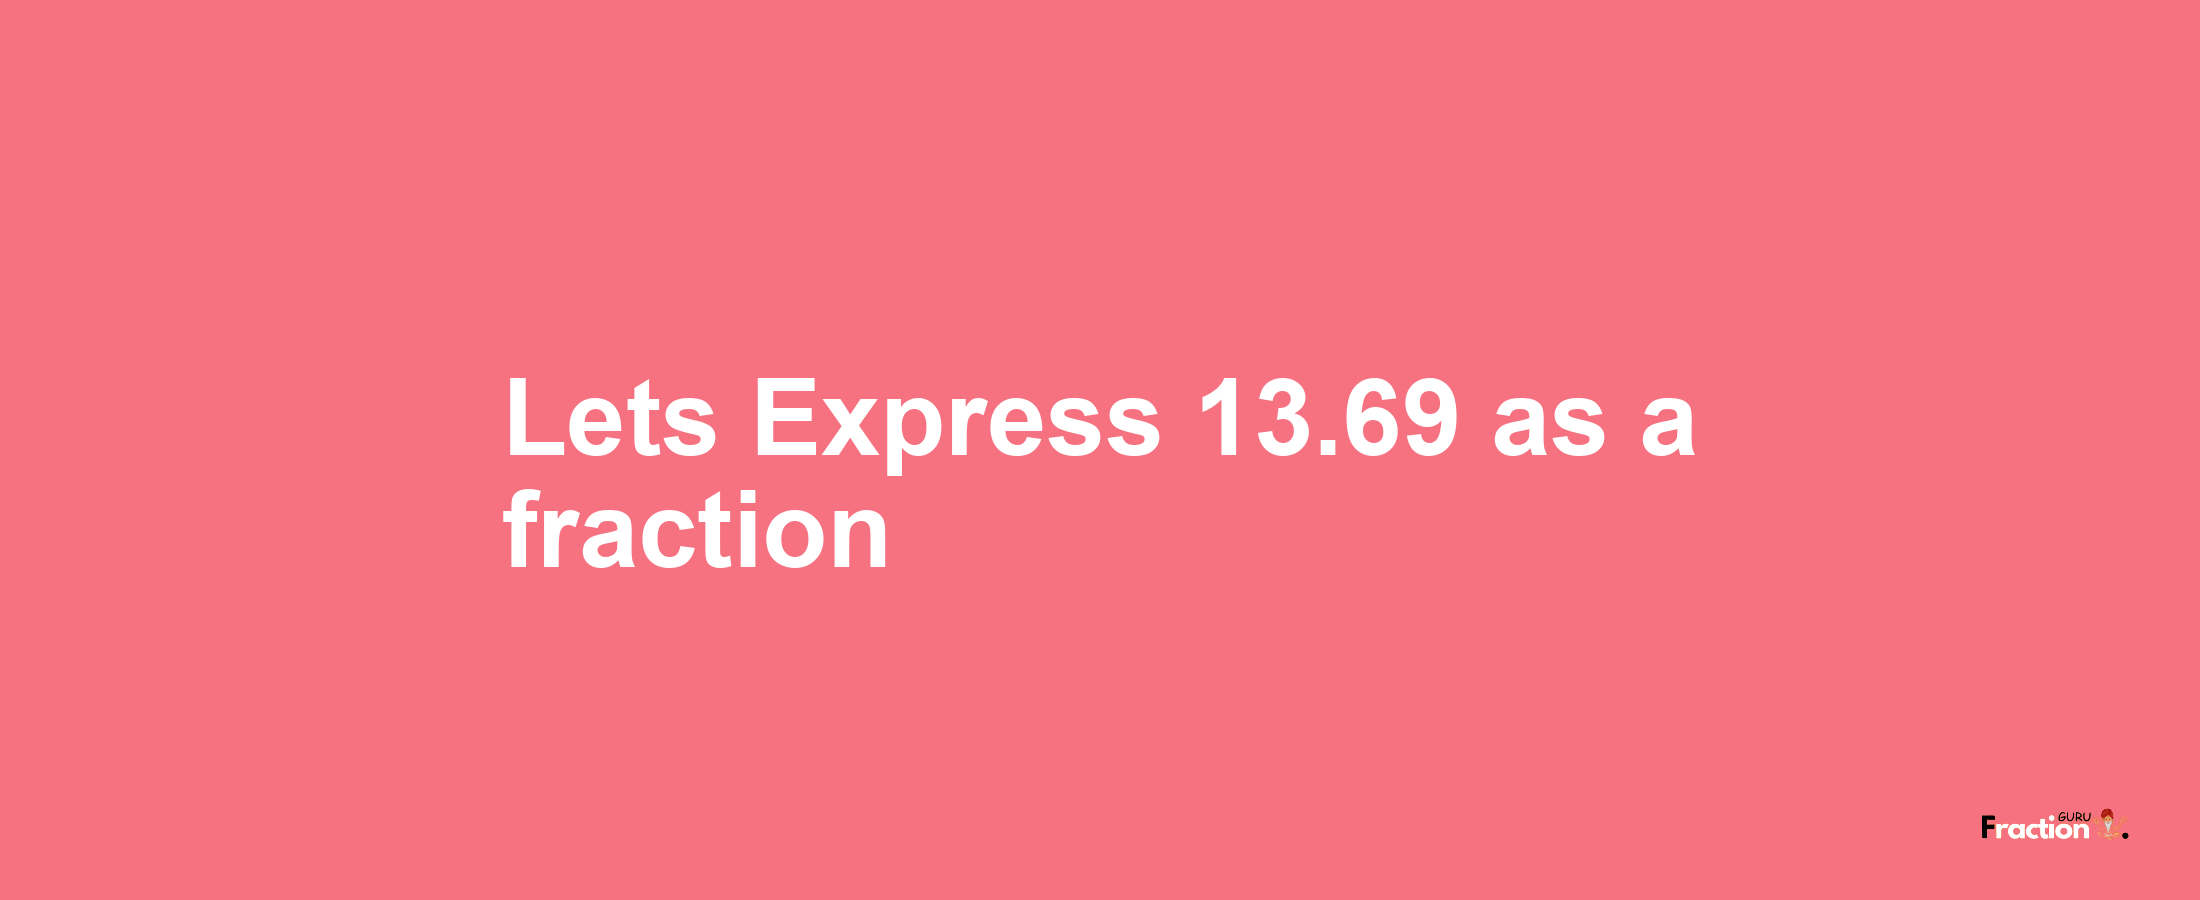 Lets Express 13.69 as afraction